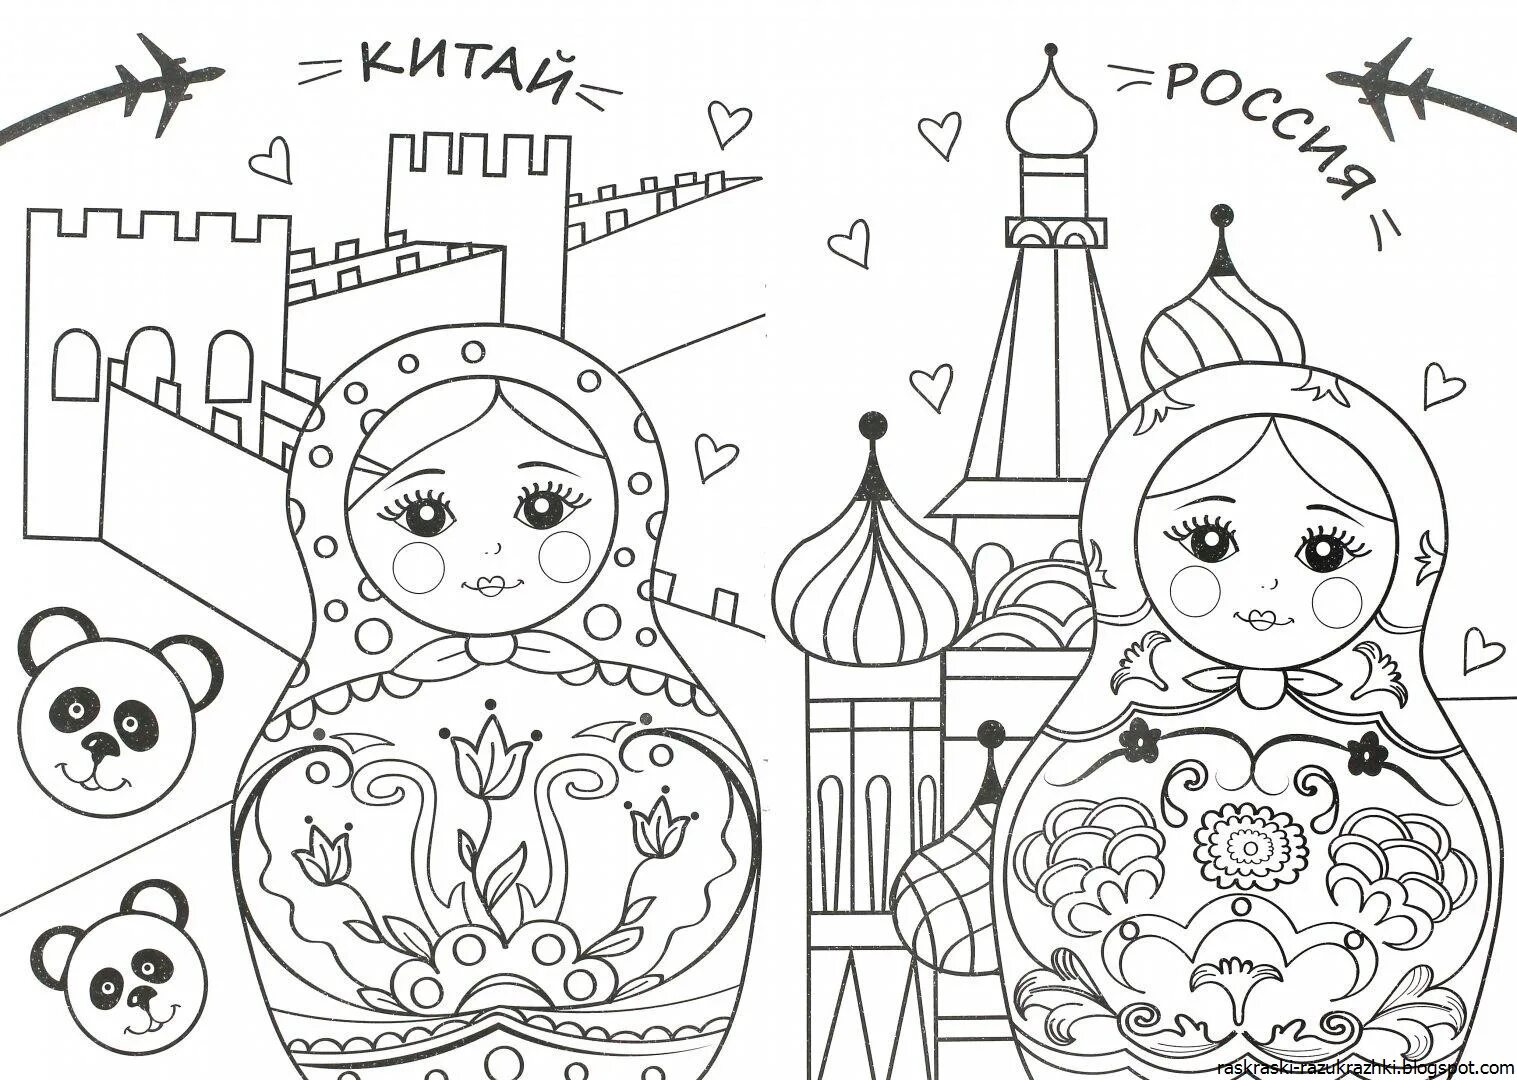 Charming rus coloring page